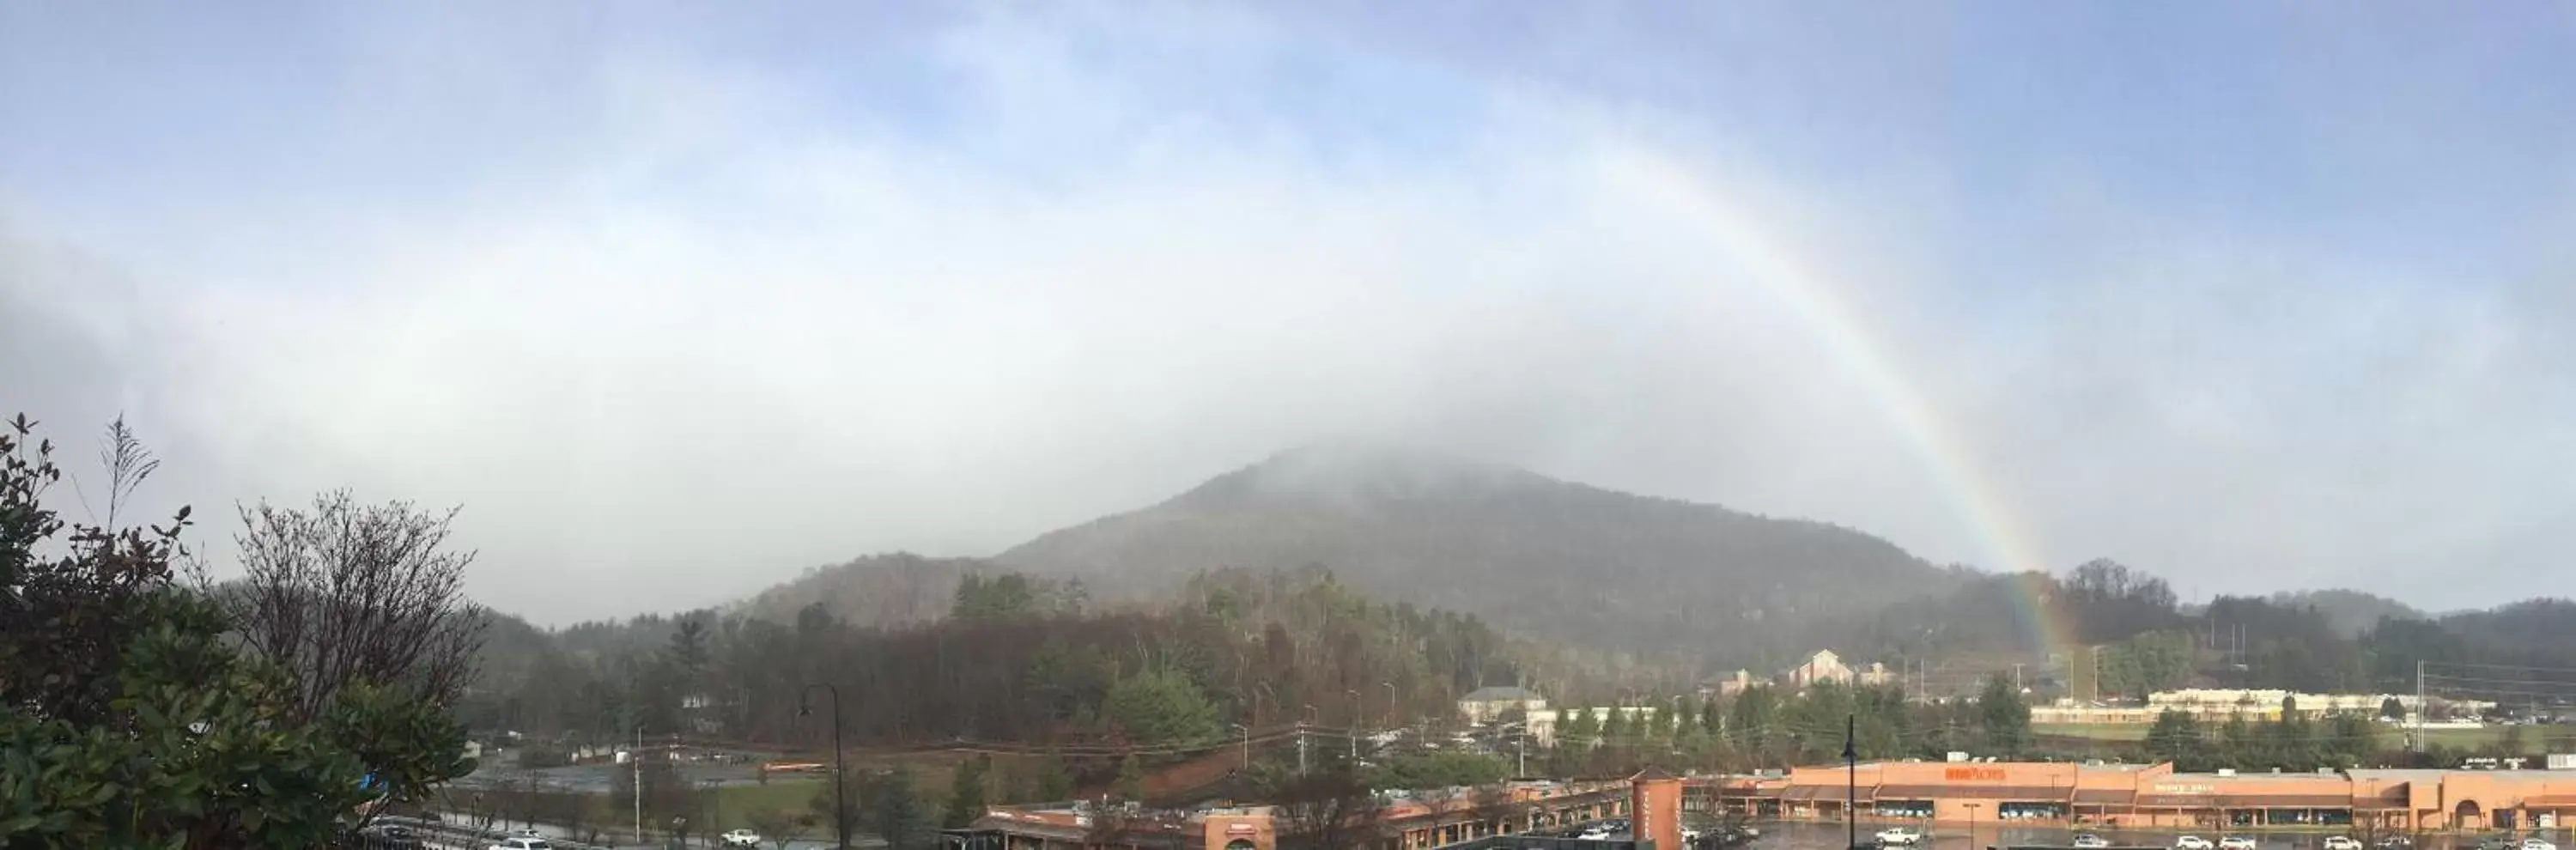 Spring, Mountain View in Country Inn & Suites by Radisson, Boone, NC